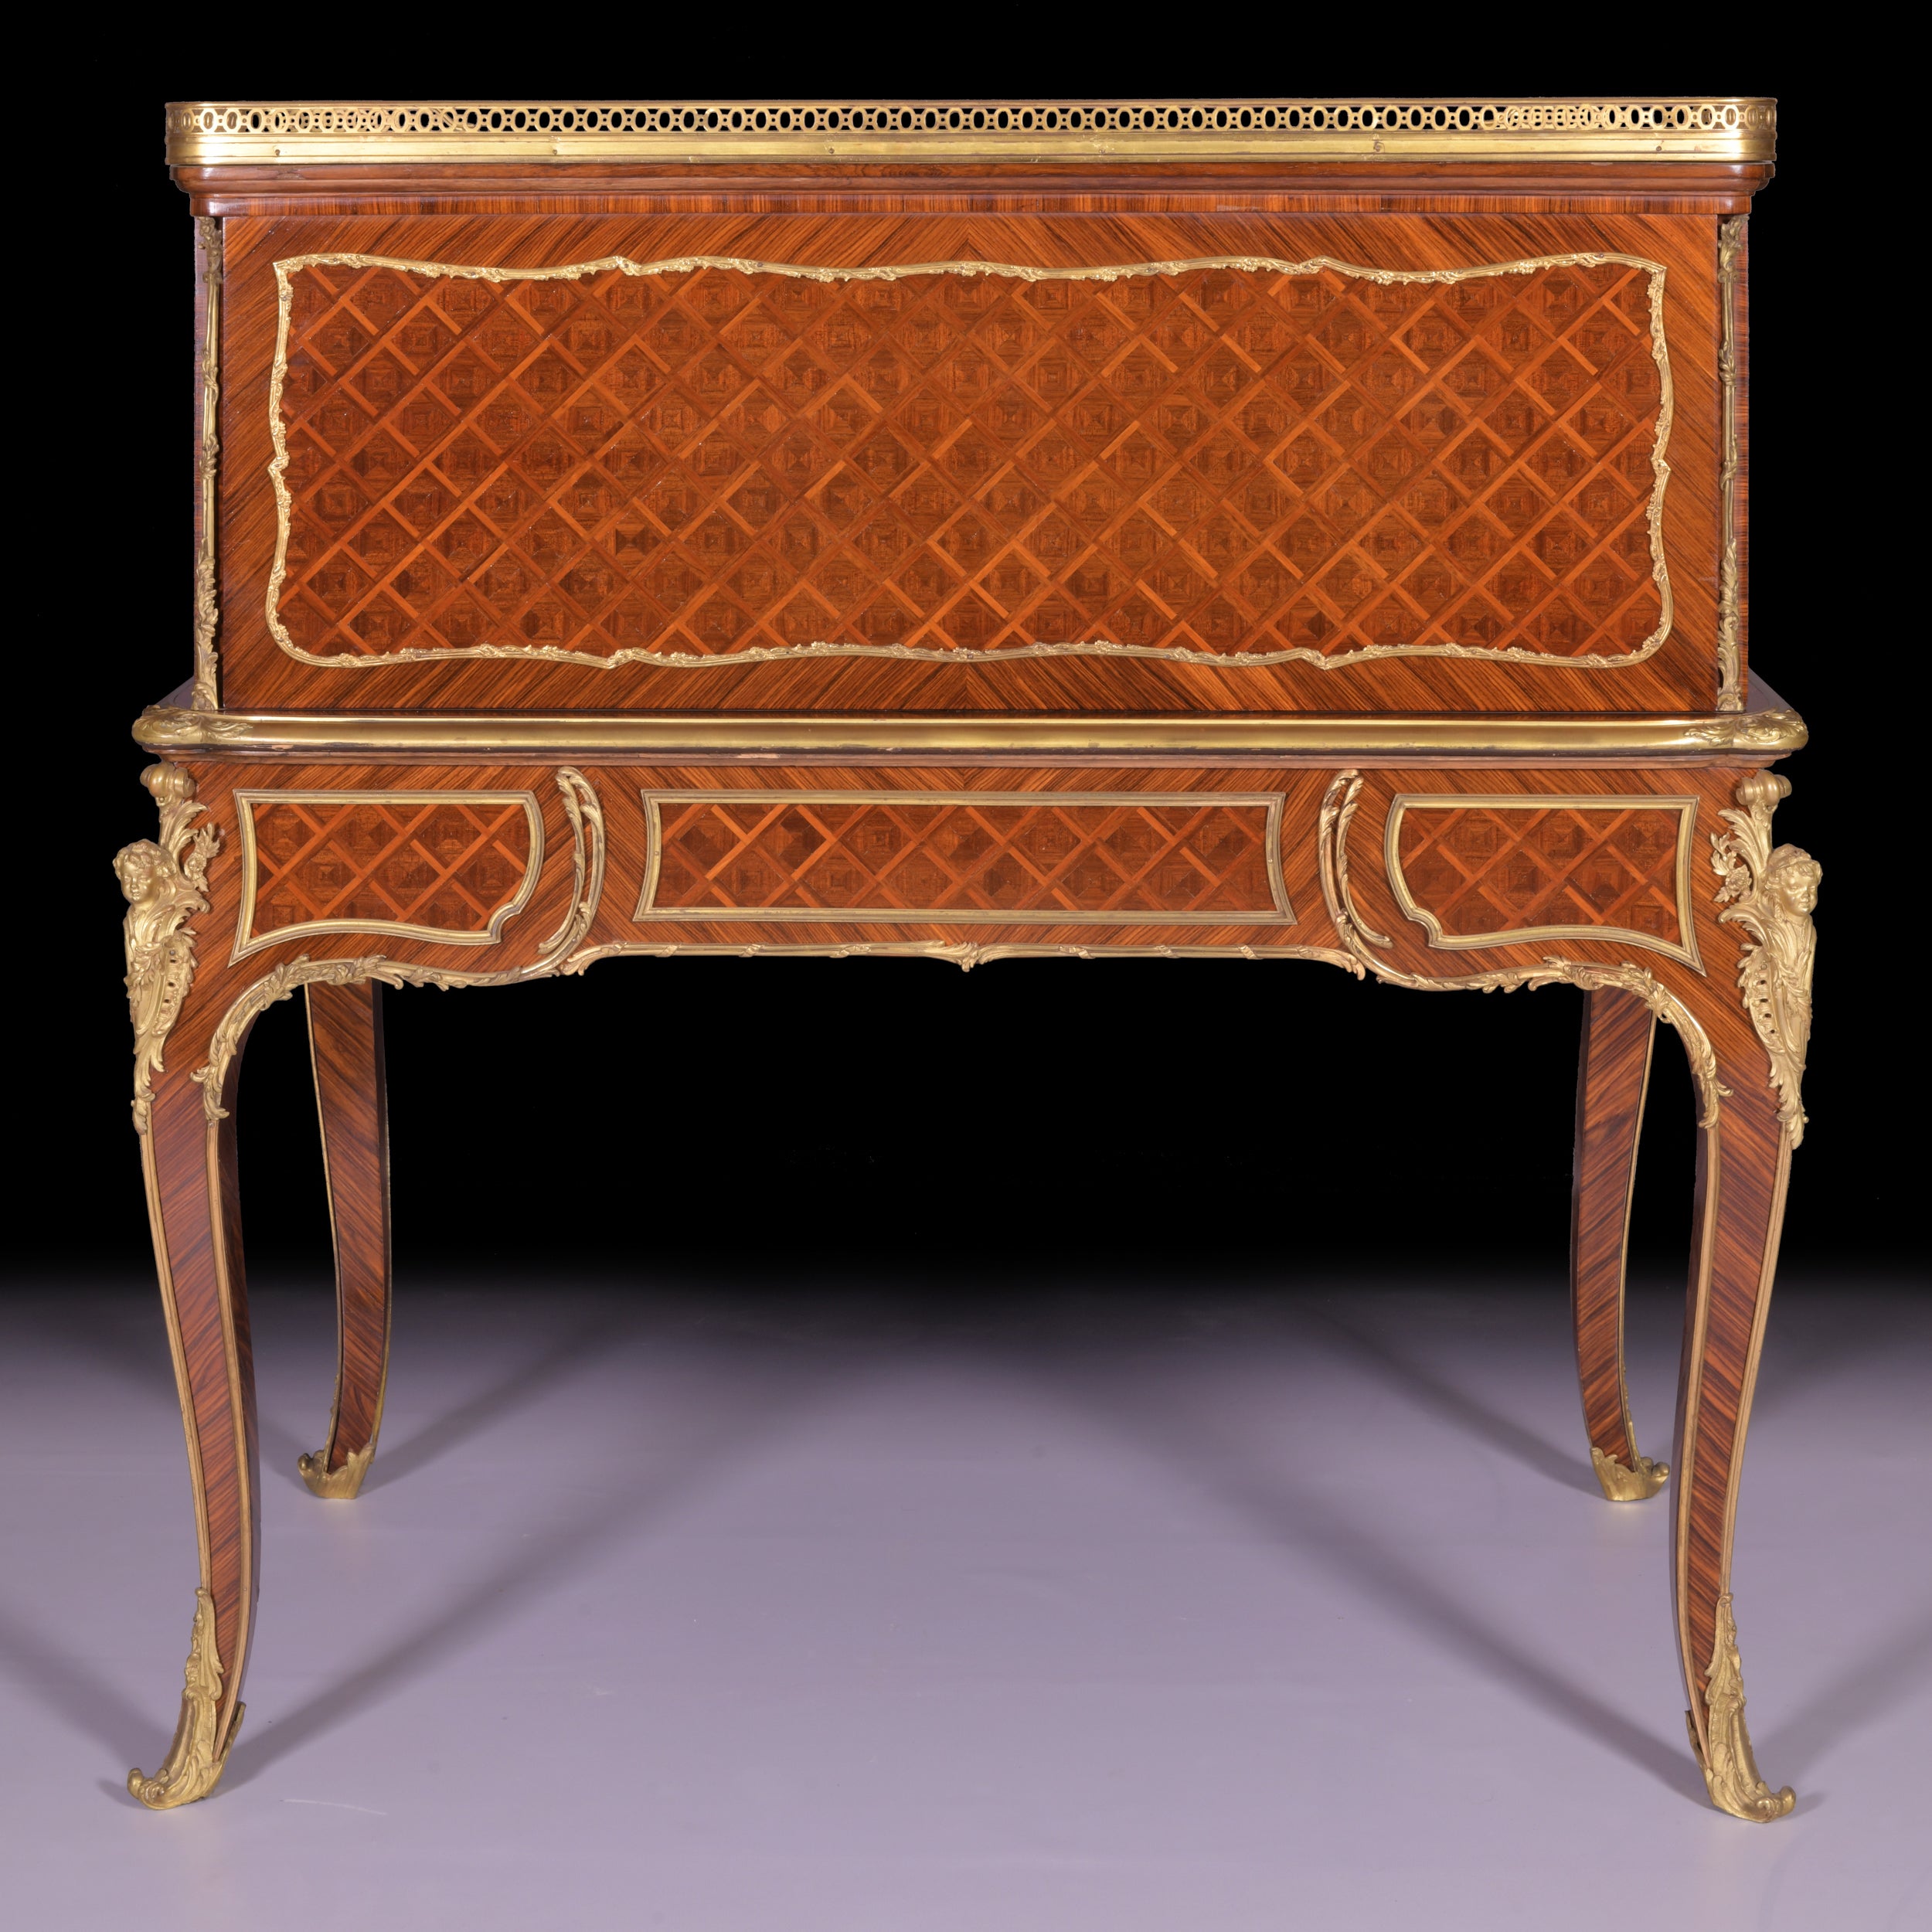 AN EXCEPTIONAL 19TH CENTURY FRENCH ROLL TOP DESK - REF No. 3007